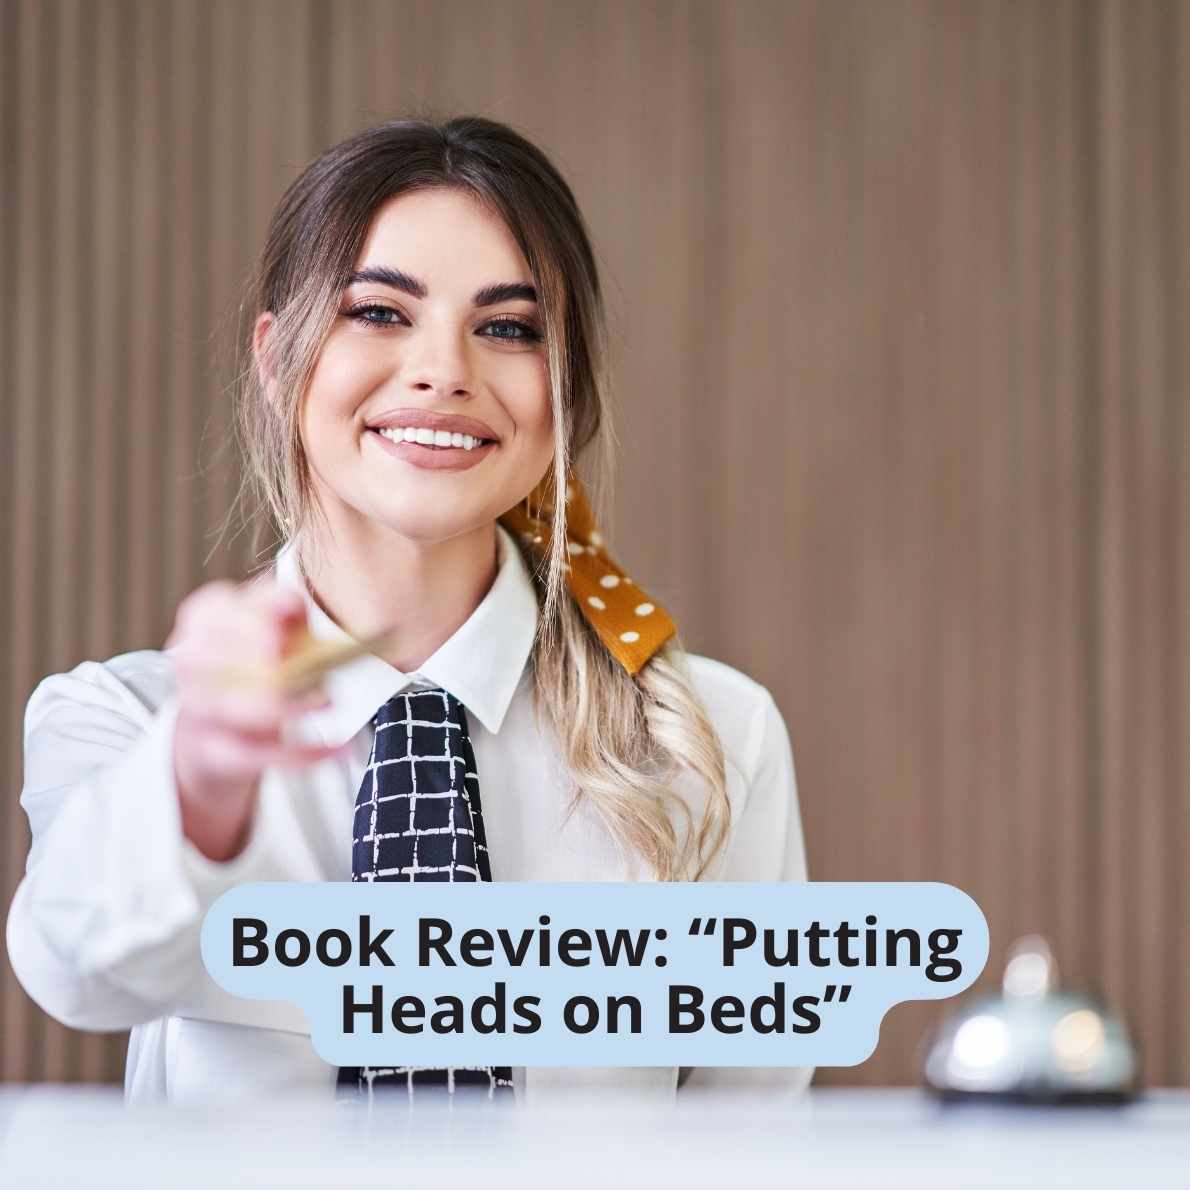 Putting heads on bed book review